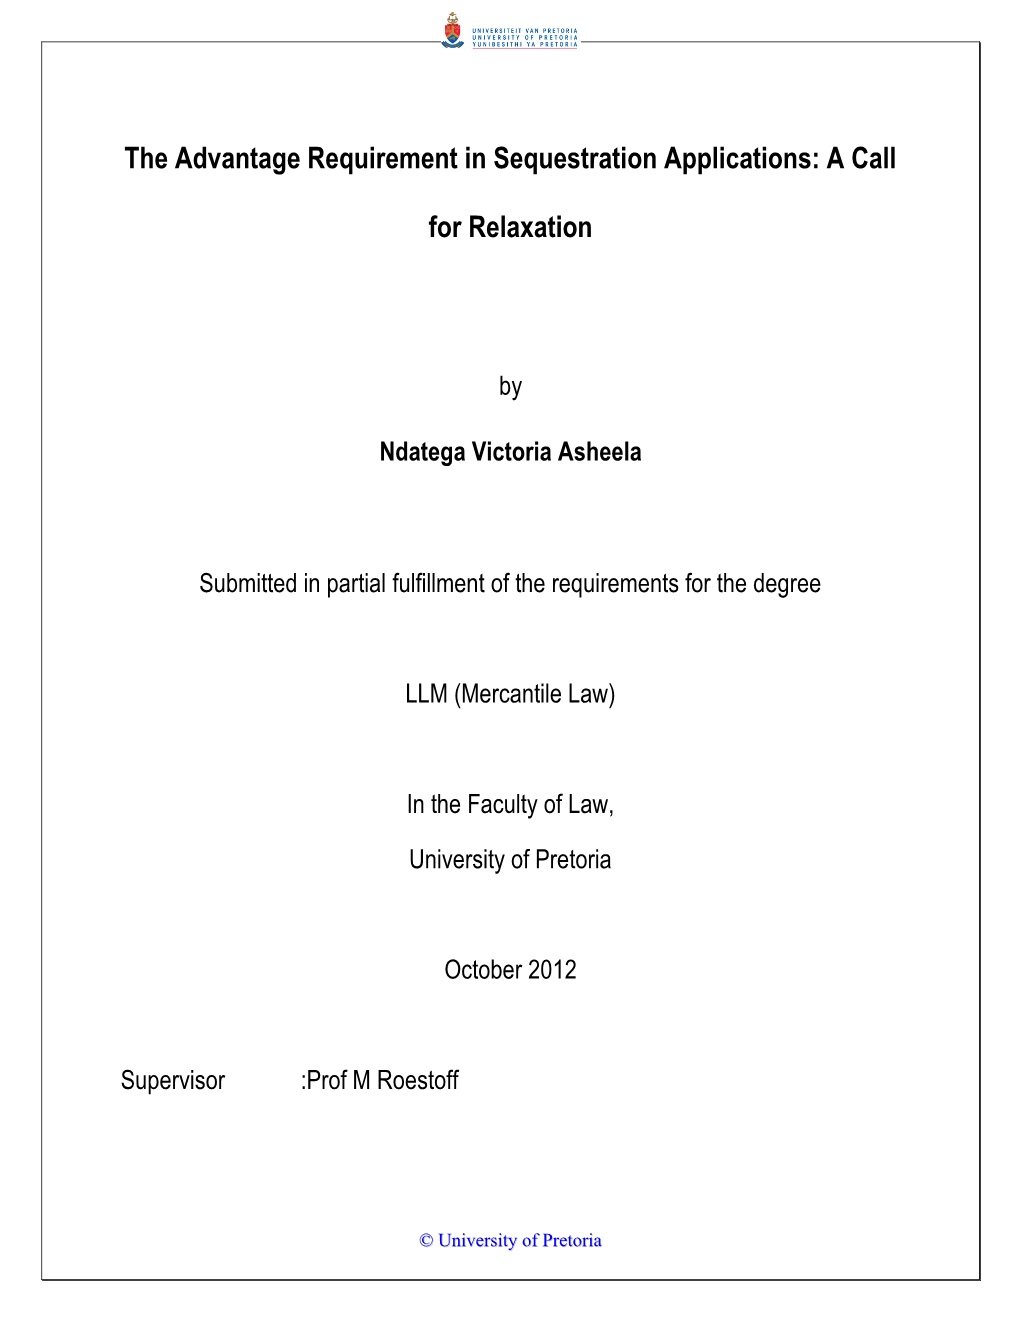 The Advantage Requirement in Sequestration Applications: a Call for Relaxation